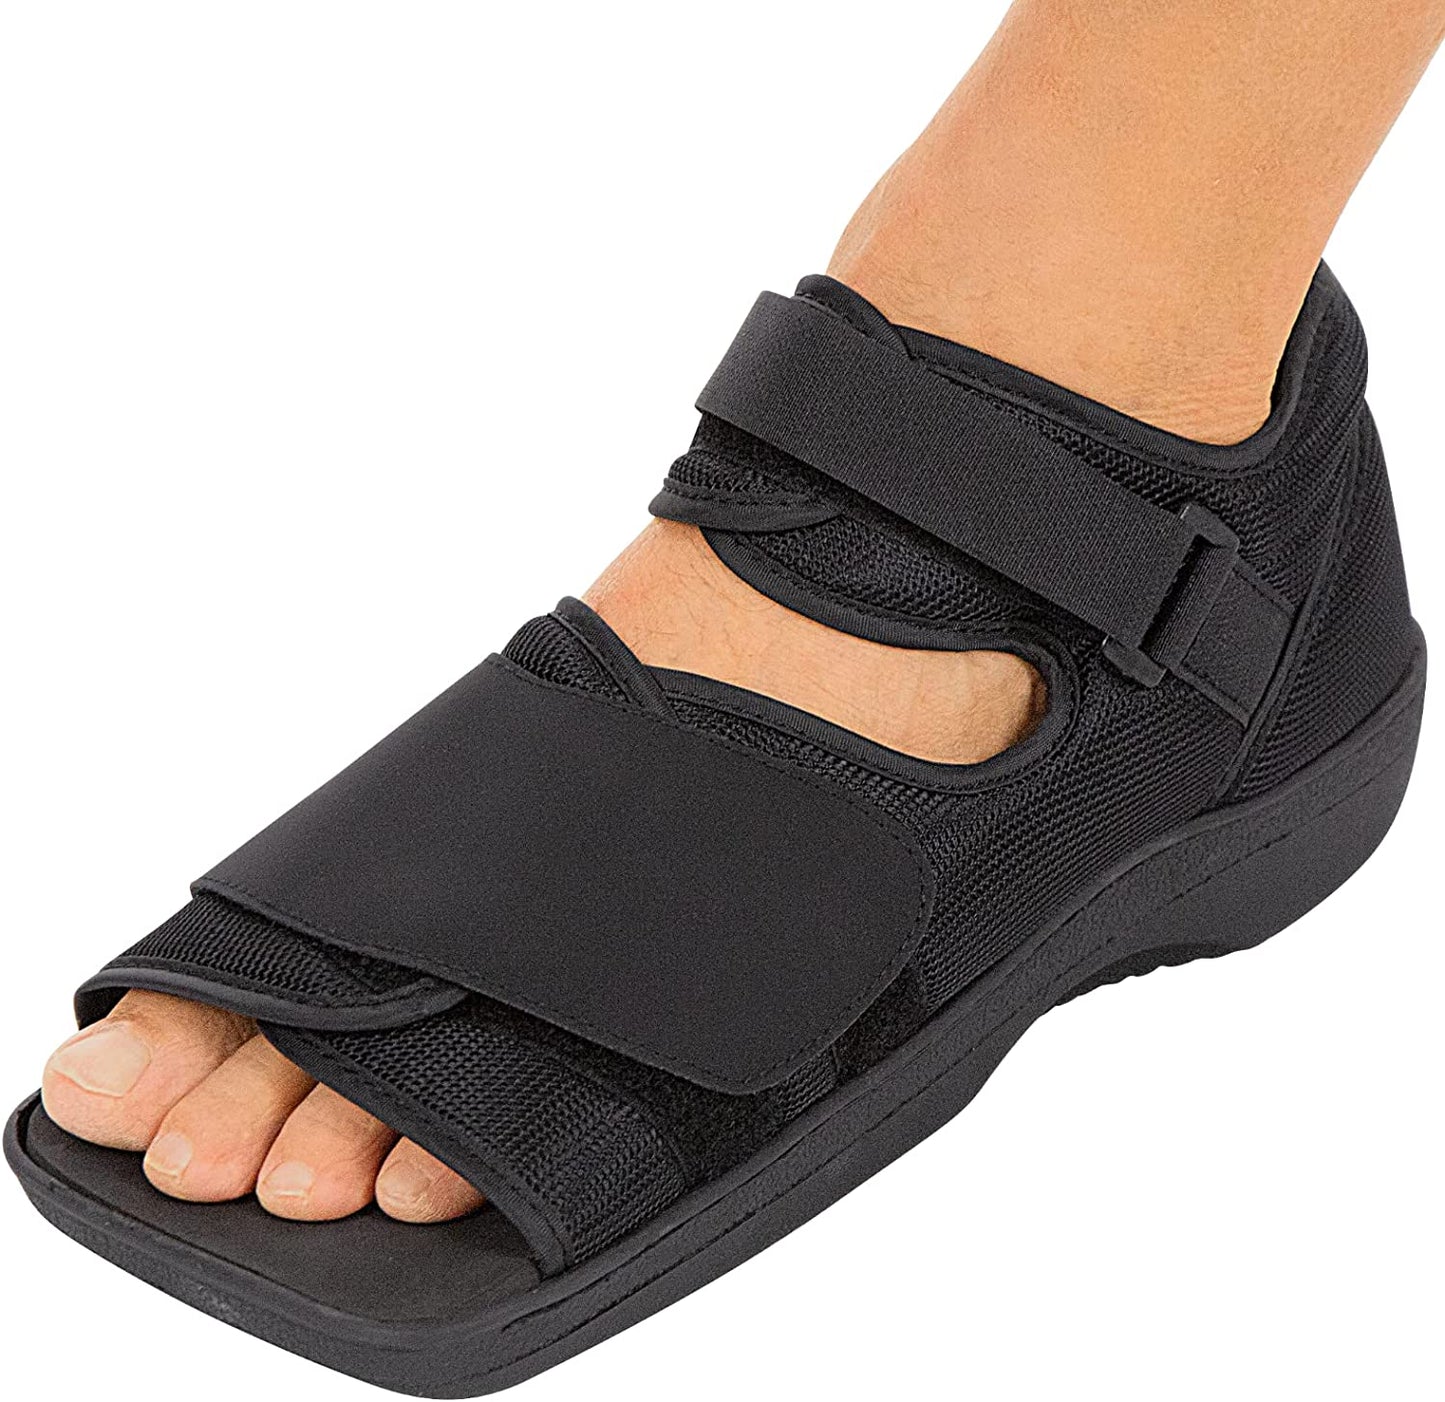 Medical-Surgical, Squared Toe, Post-Op Shoe Mens's